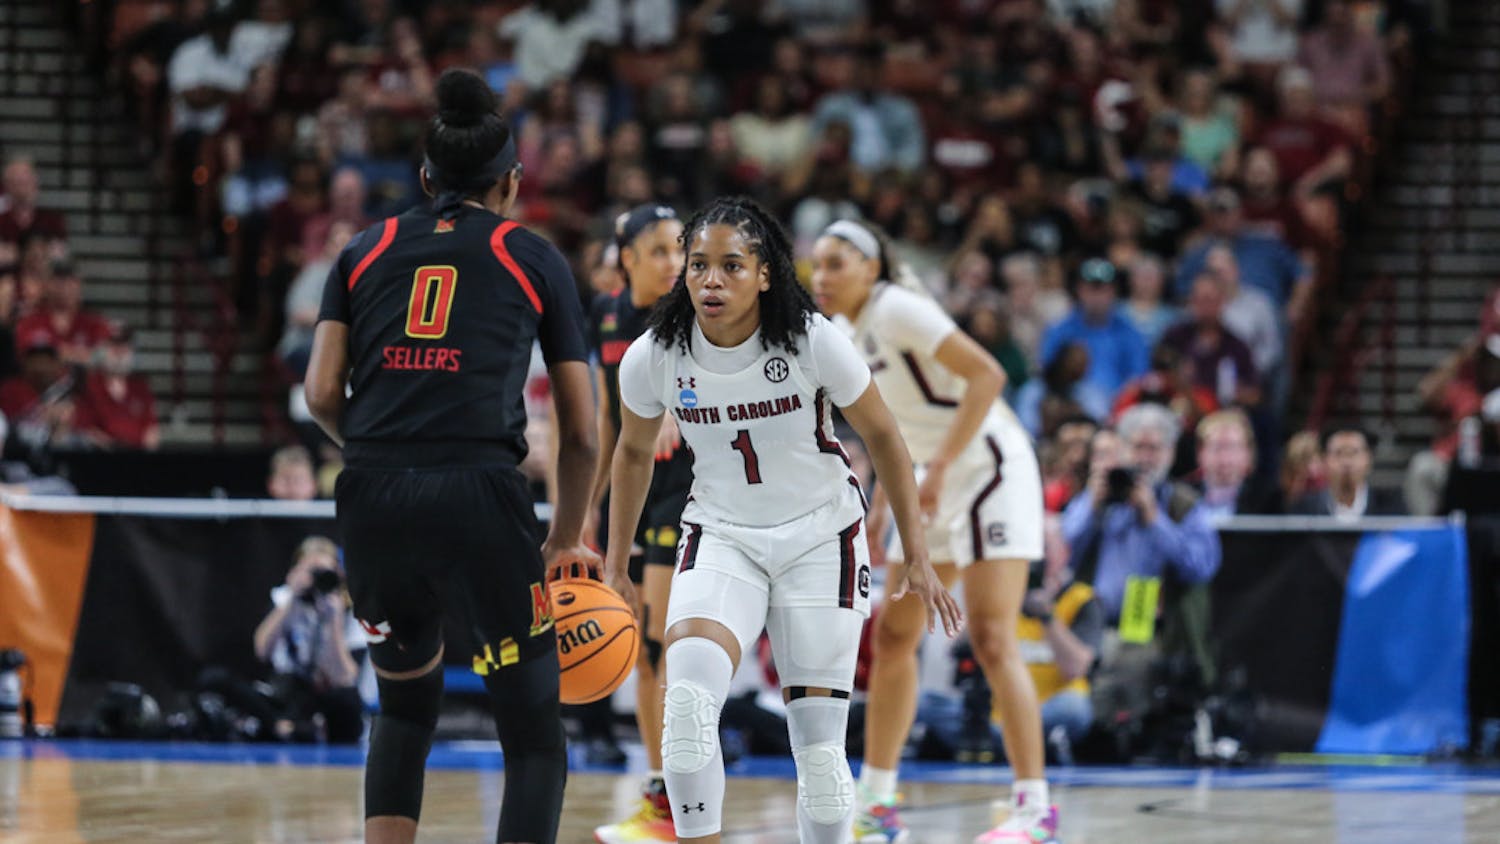 Senior guard Zia Cooke defends against Maryland's offense before the opponents pass the ball during the Elite Eight game on March 27, 2023. Cooke scored 18 points for the Gamecocks.